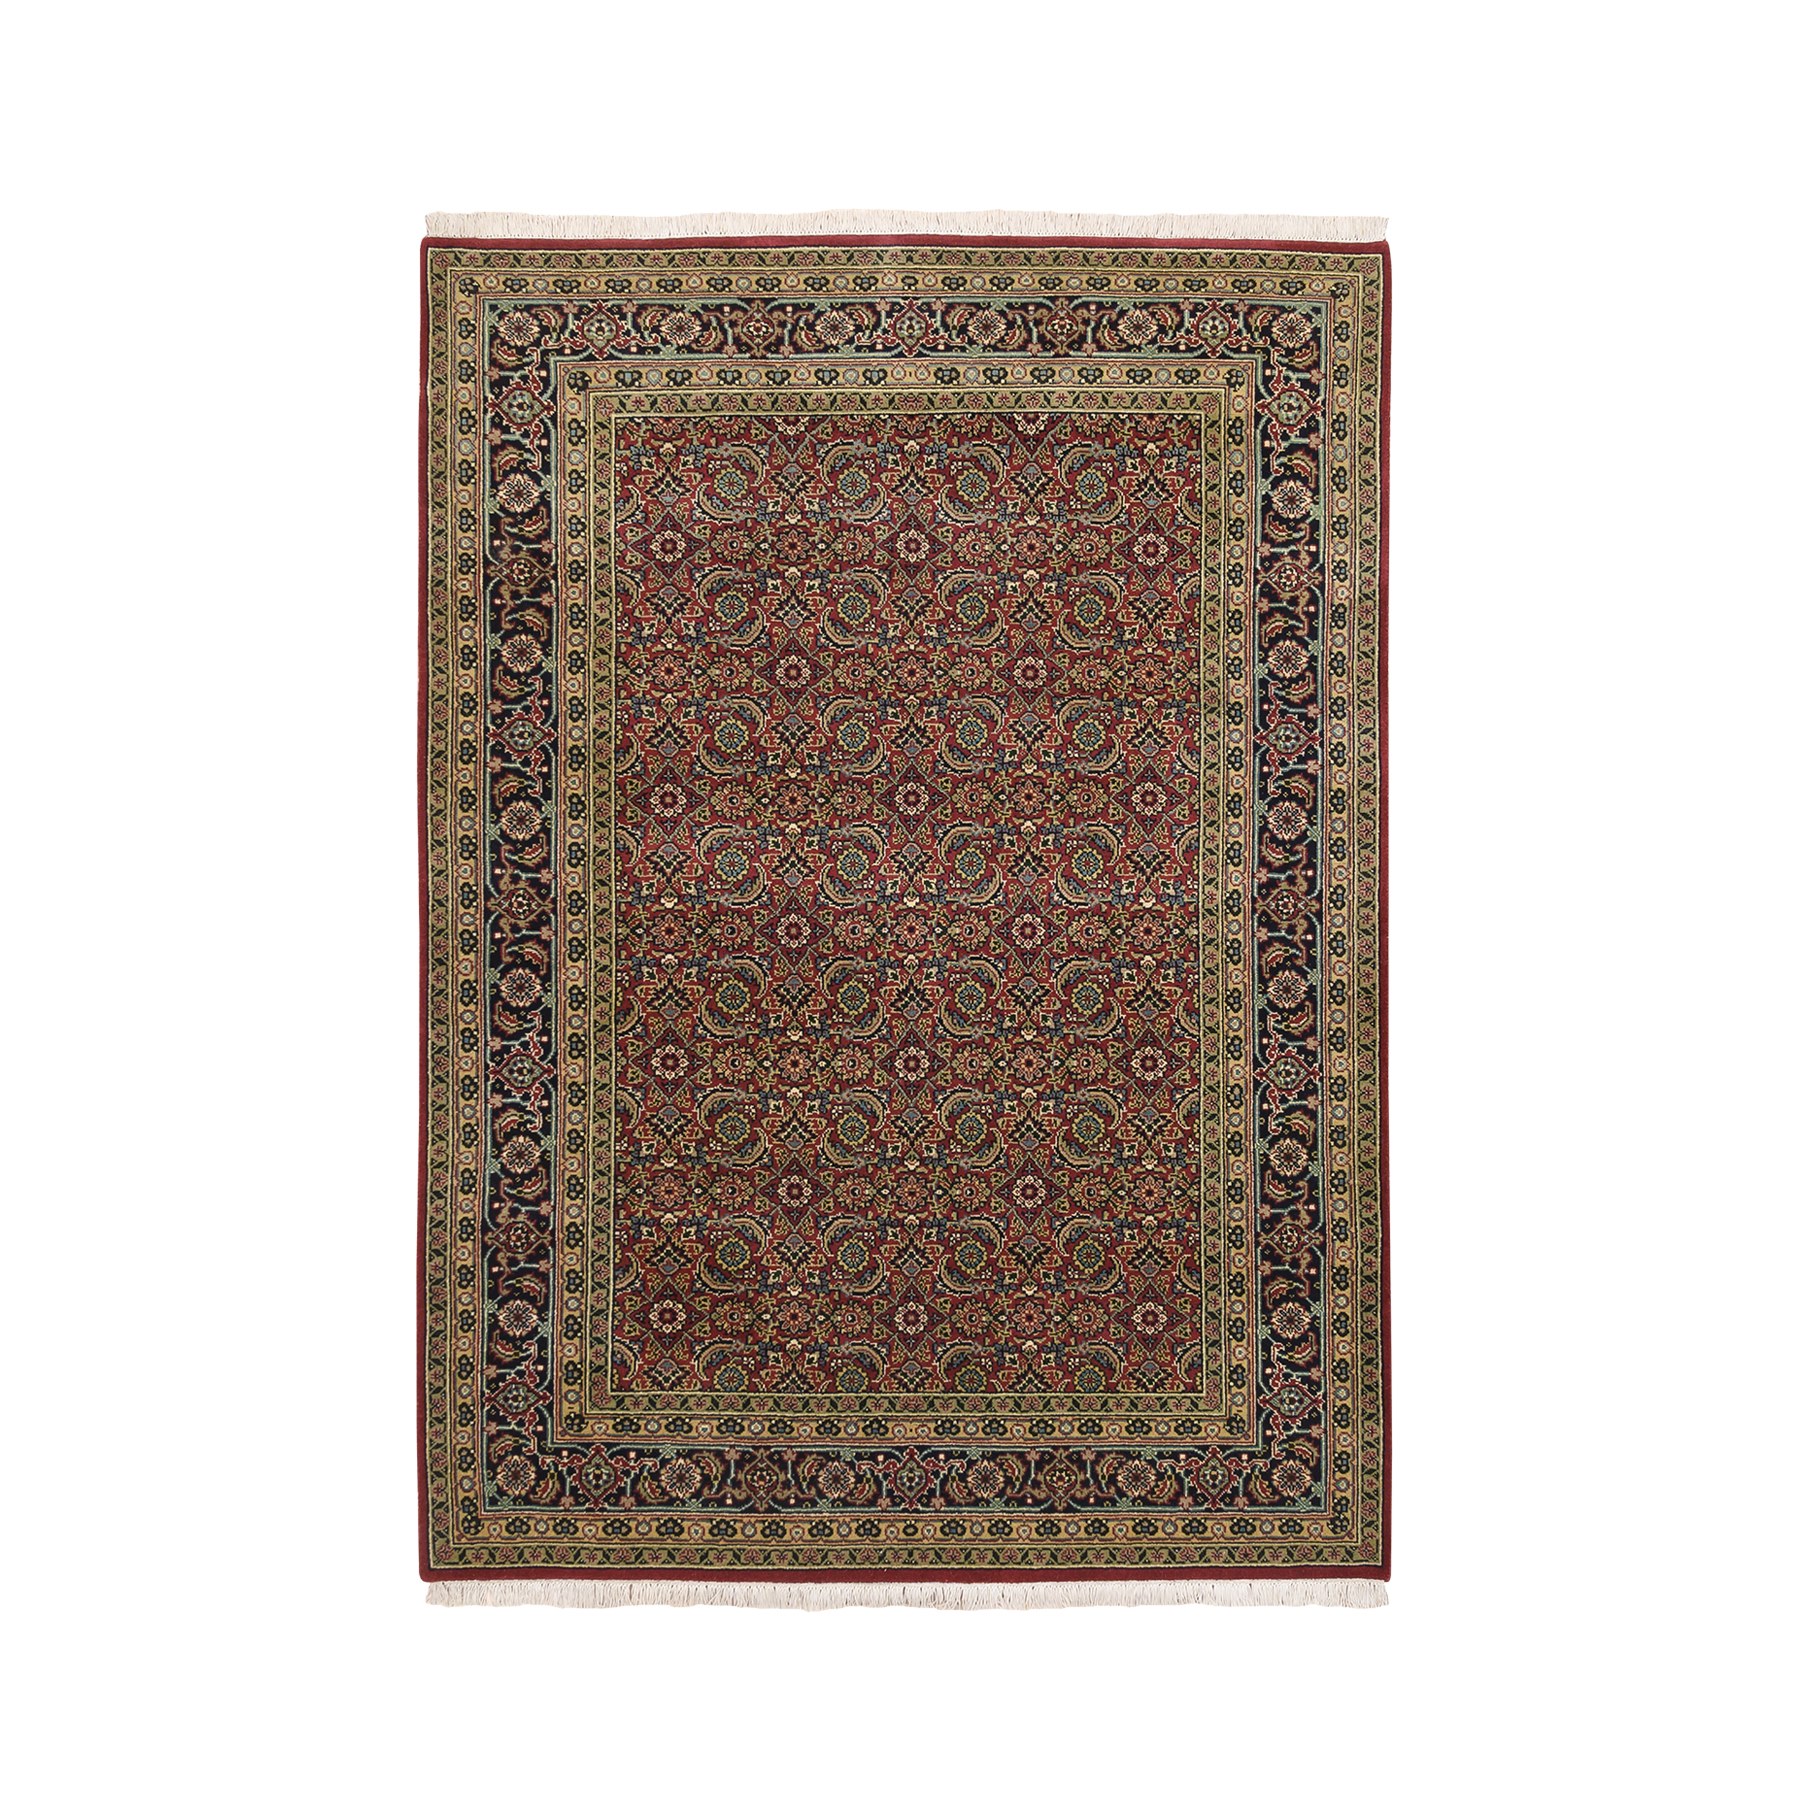 Pirniakan Collection Hand Knotted Red Rug No: 1125988